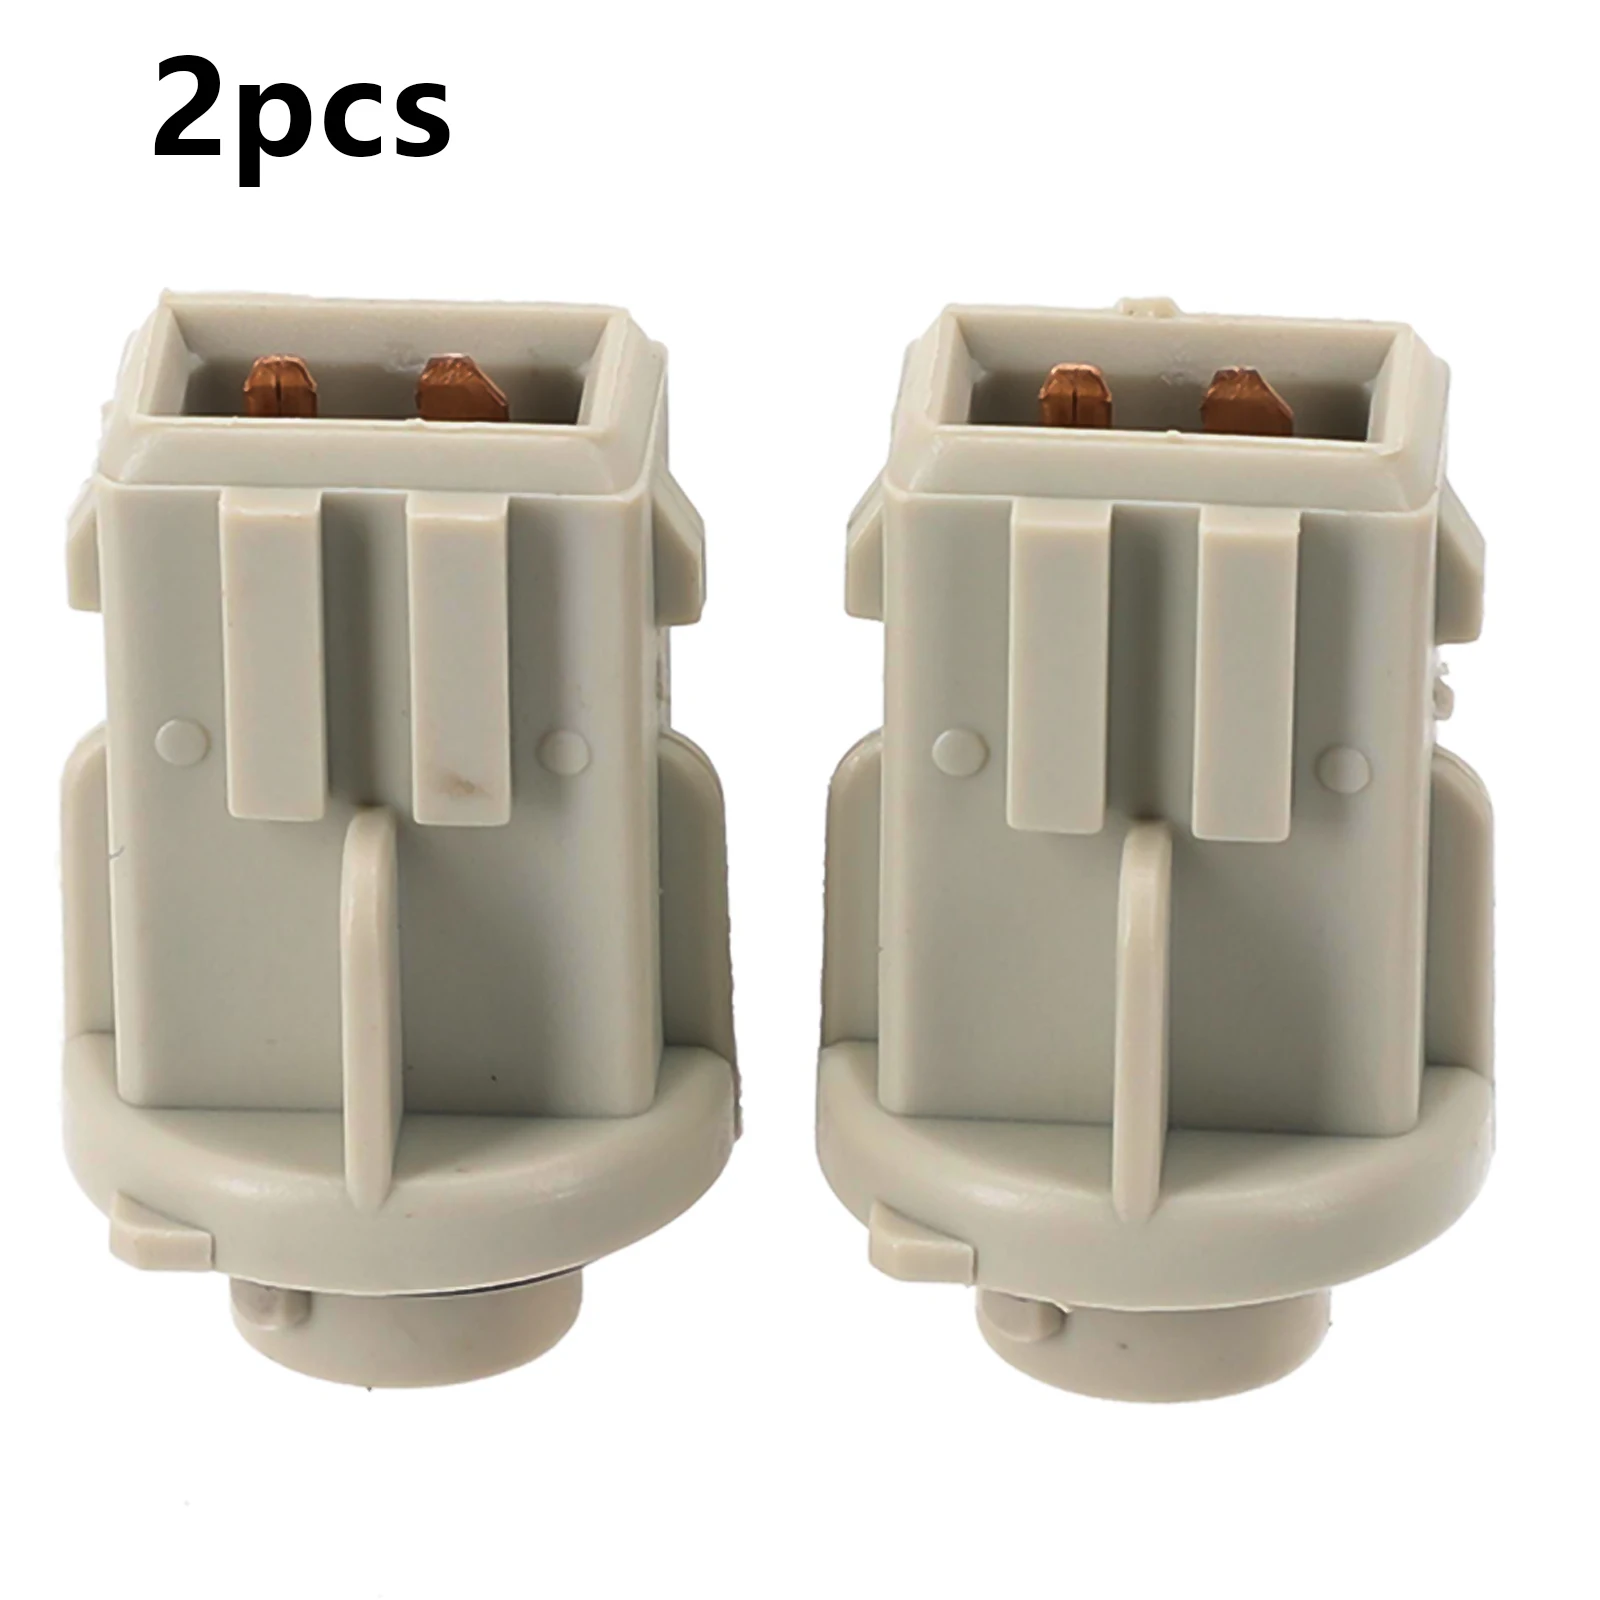 

2pcs/set New Car Side Lamp Light Bulb Holders Plastic Left Or Right Replacement 191941669A For T4 Transporter 1990 To 2003